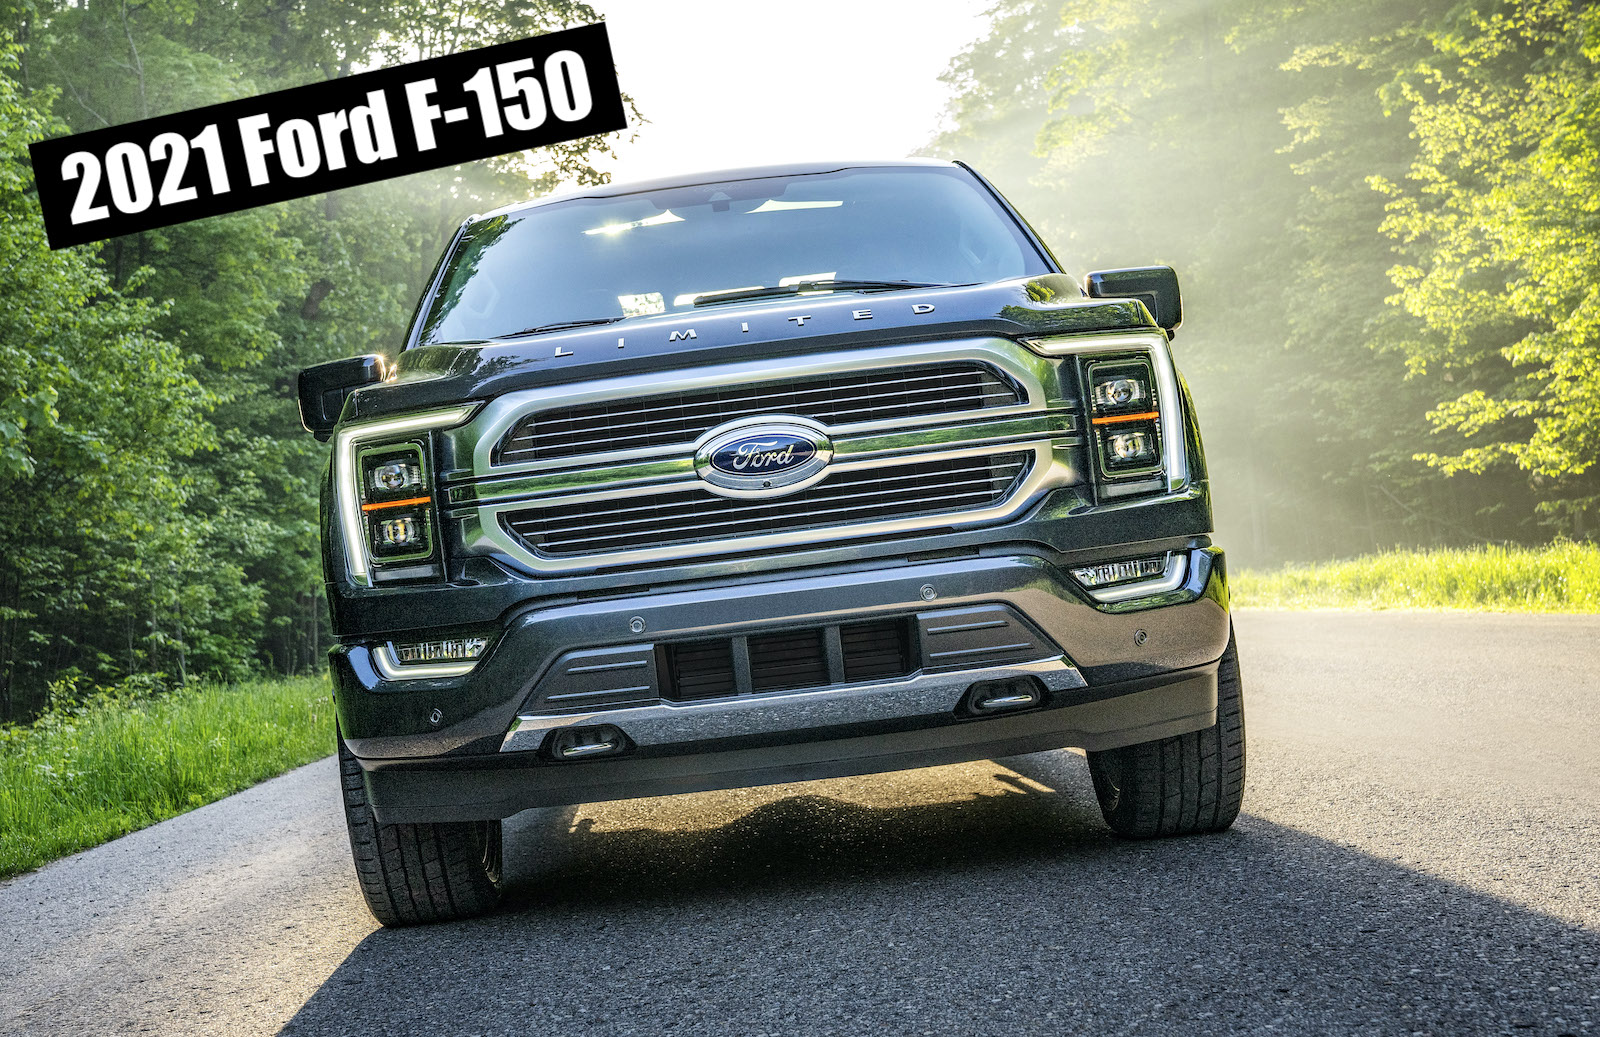 2021 Ford F 150 Revealed Everything You Need To Know Video